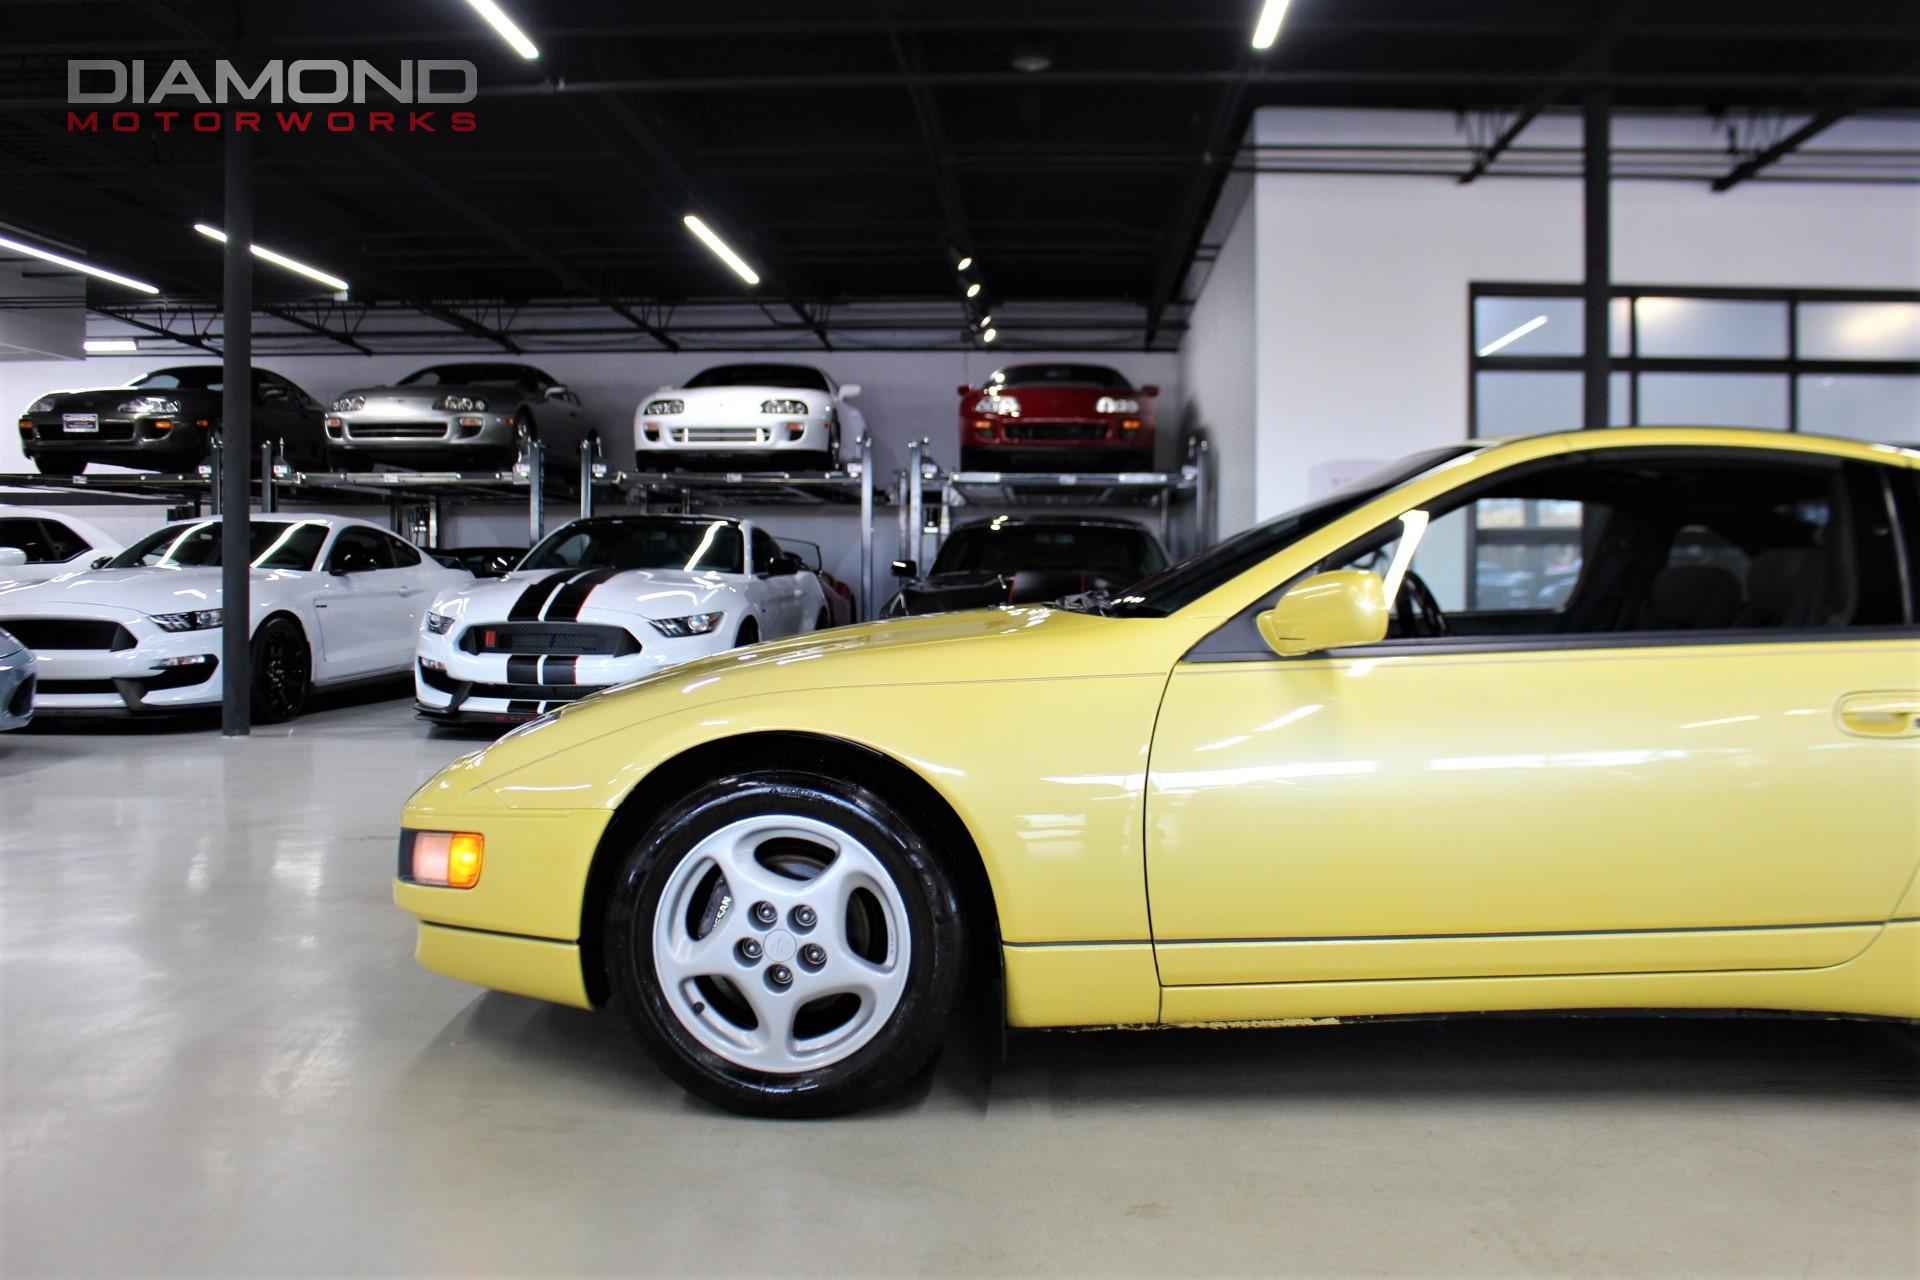 Used-1990-Nissan-300ZX-GS